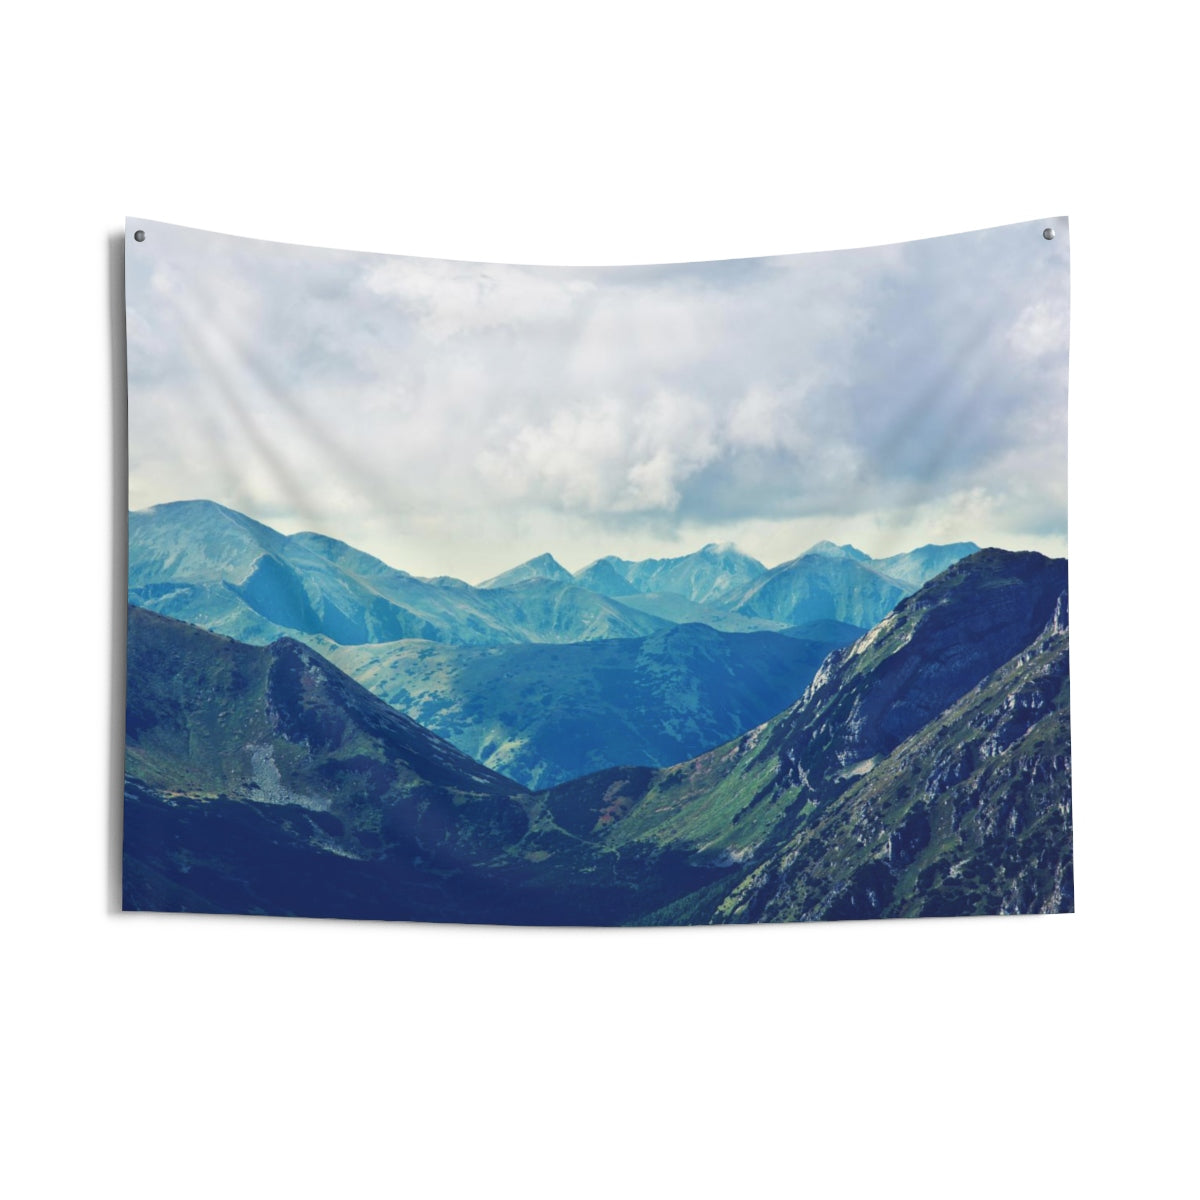 Mountain Tapestry, Nature Photo Peak Sky Landscape Horizontal Scenic Indoor Wall Tapestries Starcove Fashion